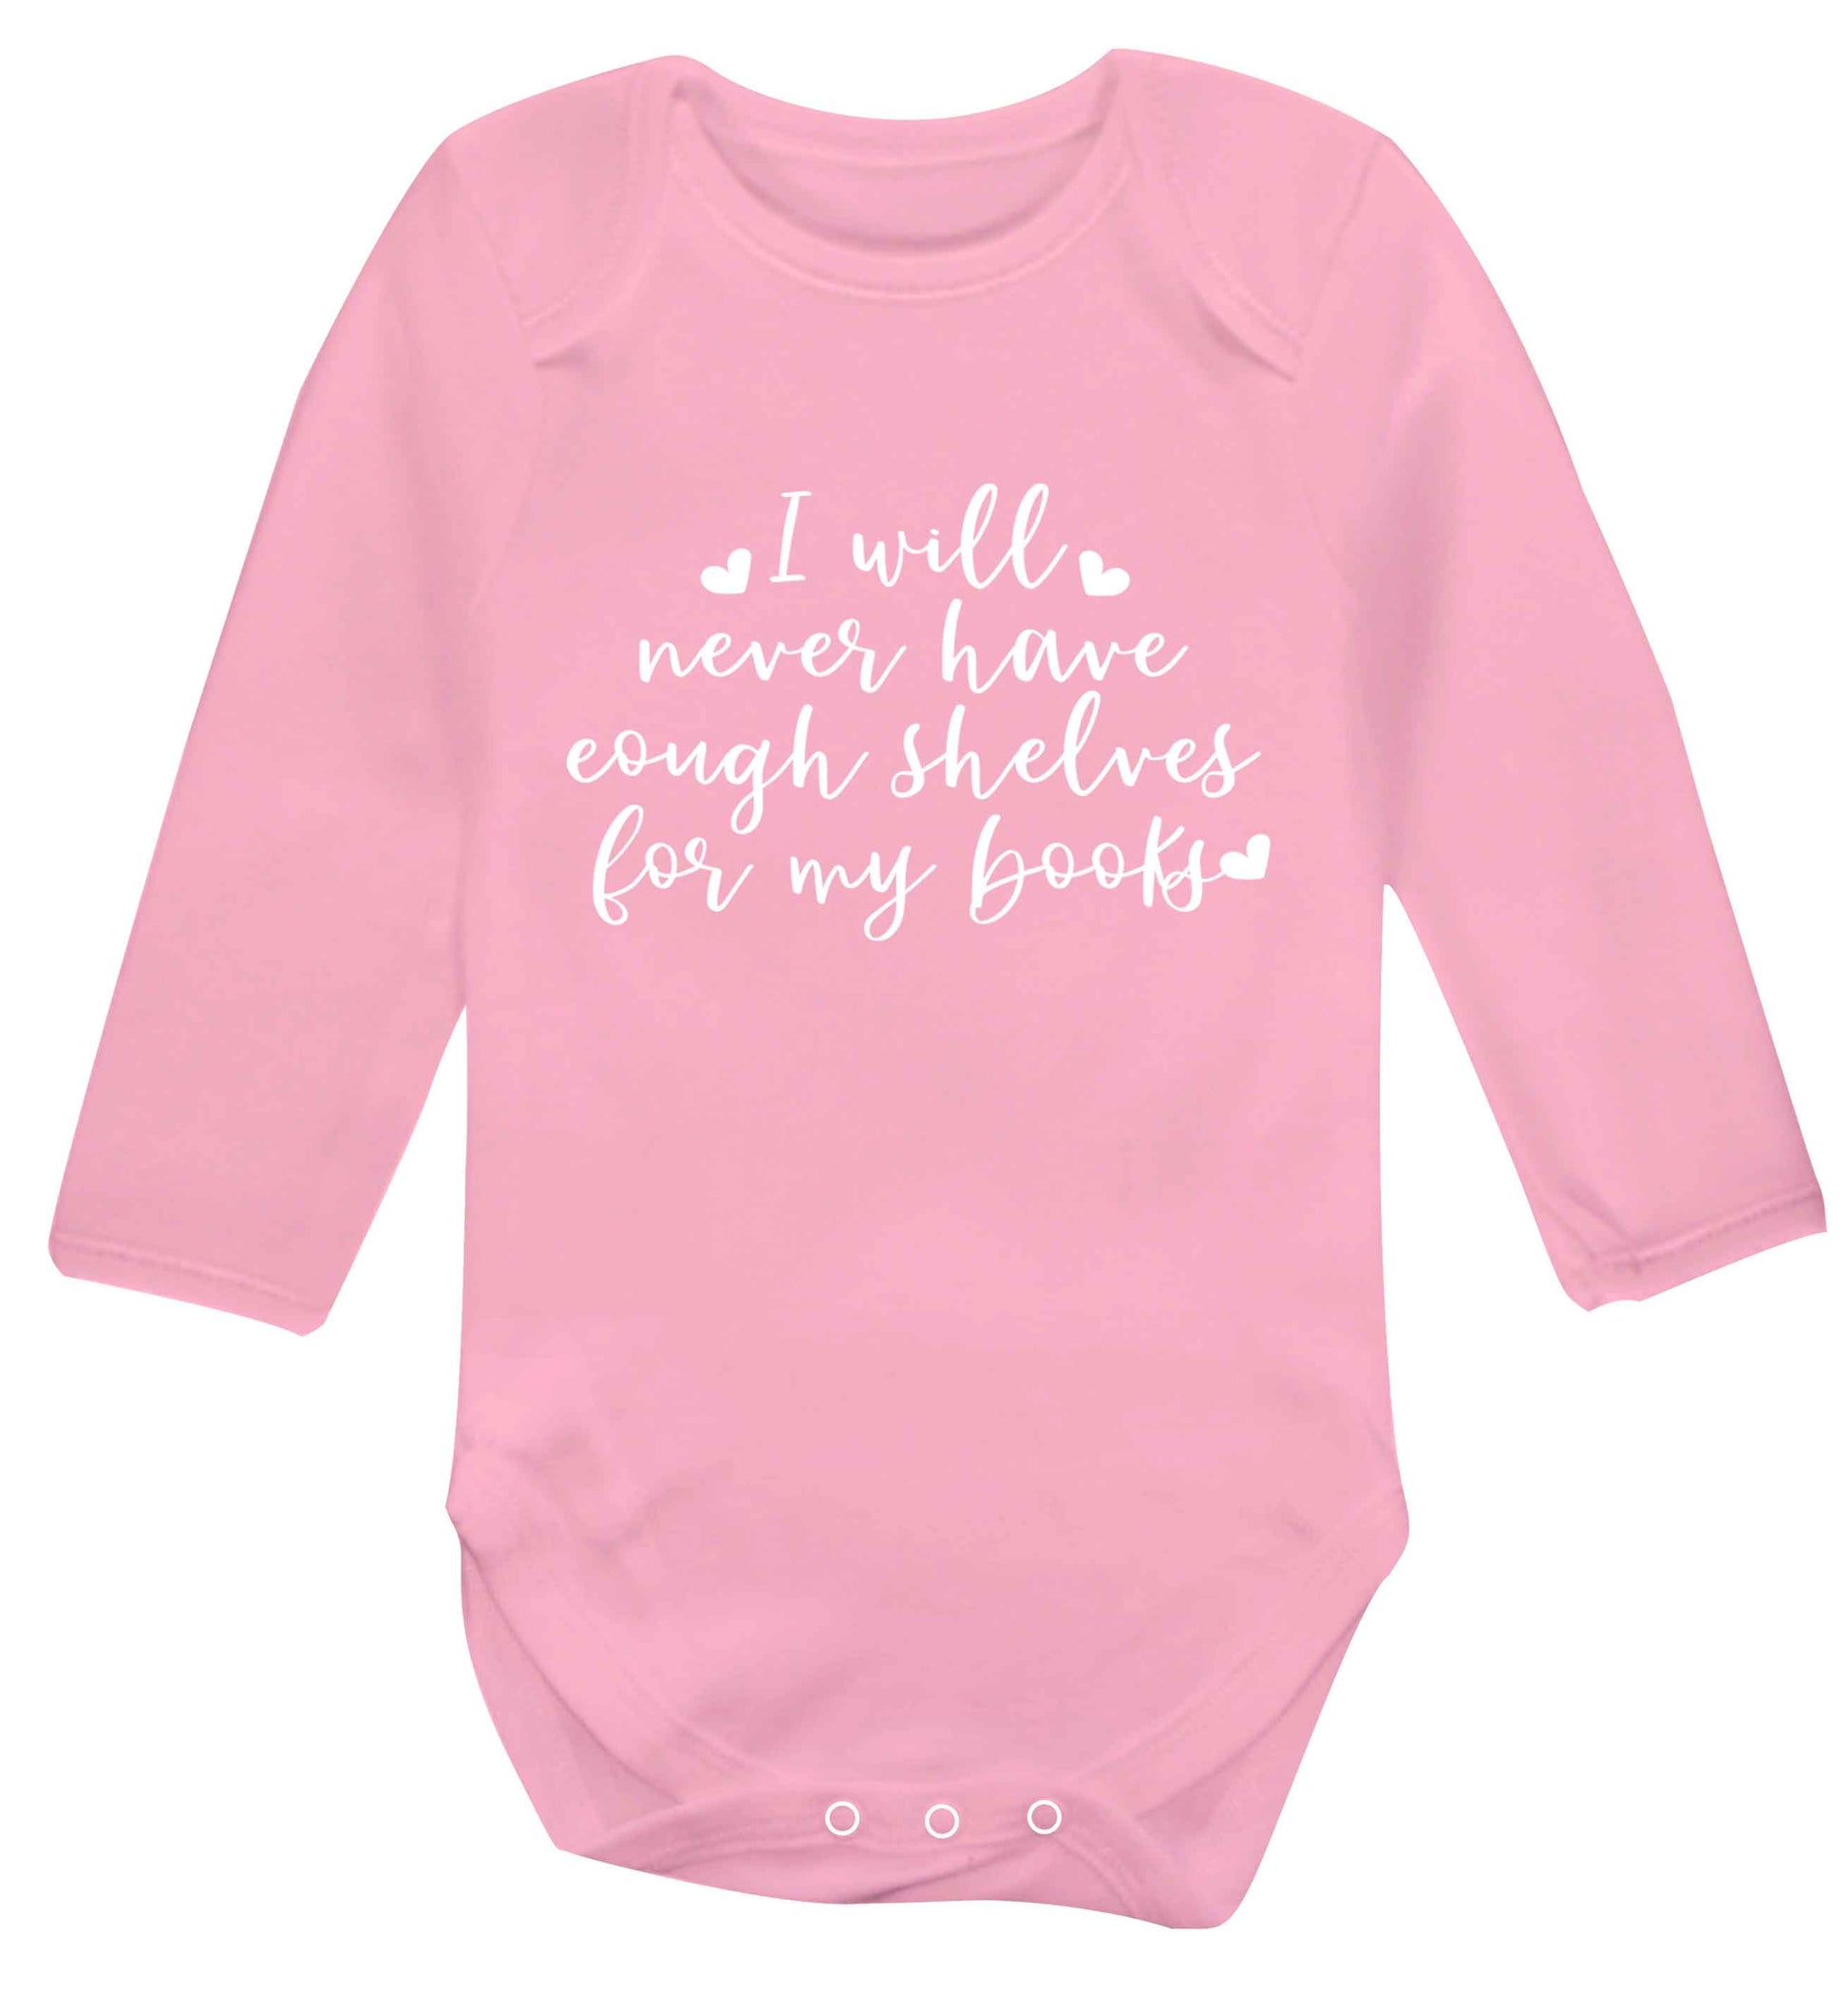 I will never have enough shelves for my books Baby Vest long sleeved pale pink 6-12 months